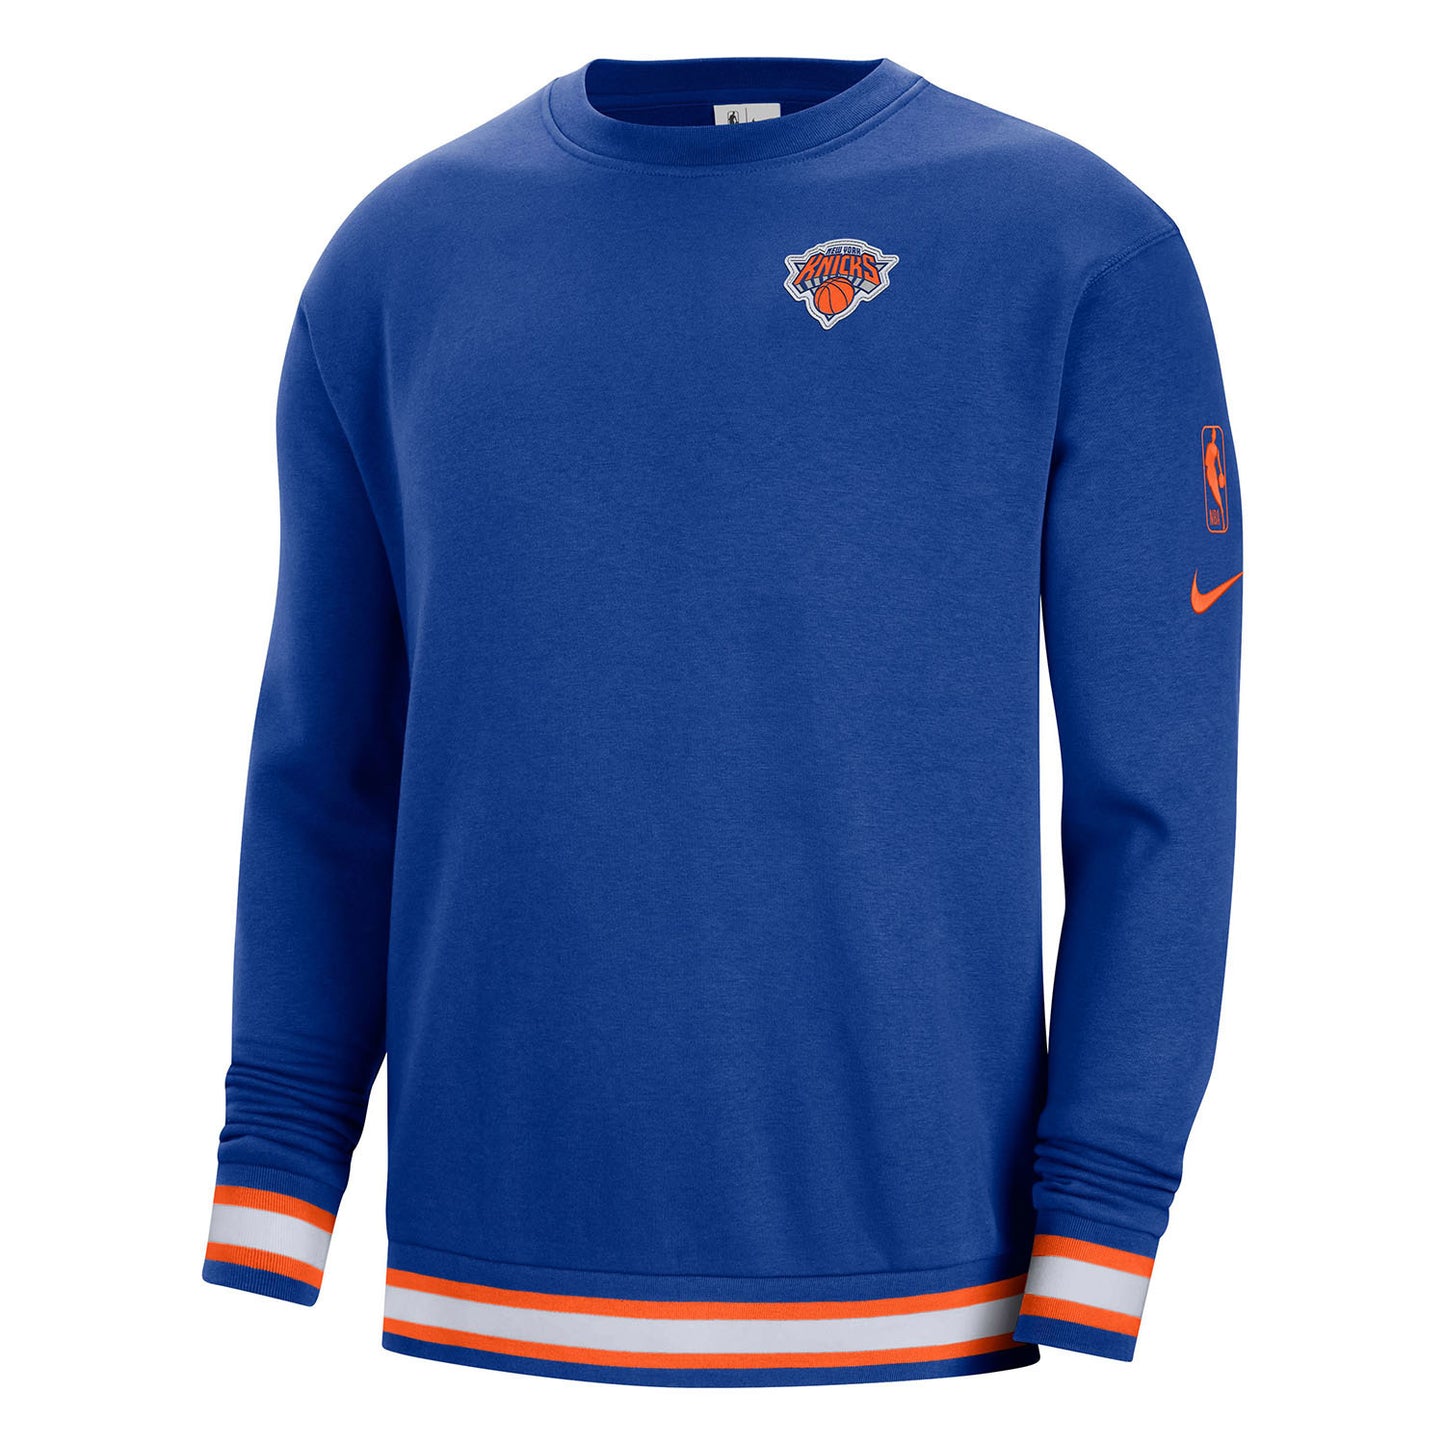 Nike Knicks Courtside Crew Sweater In Blue - Front View